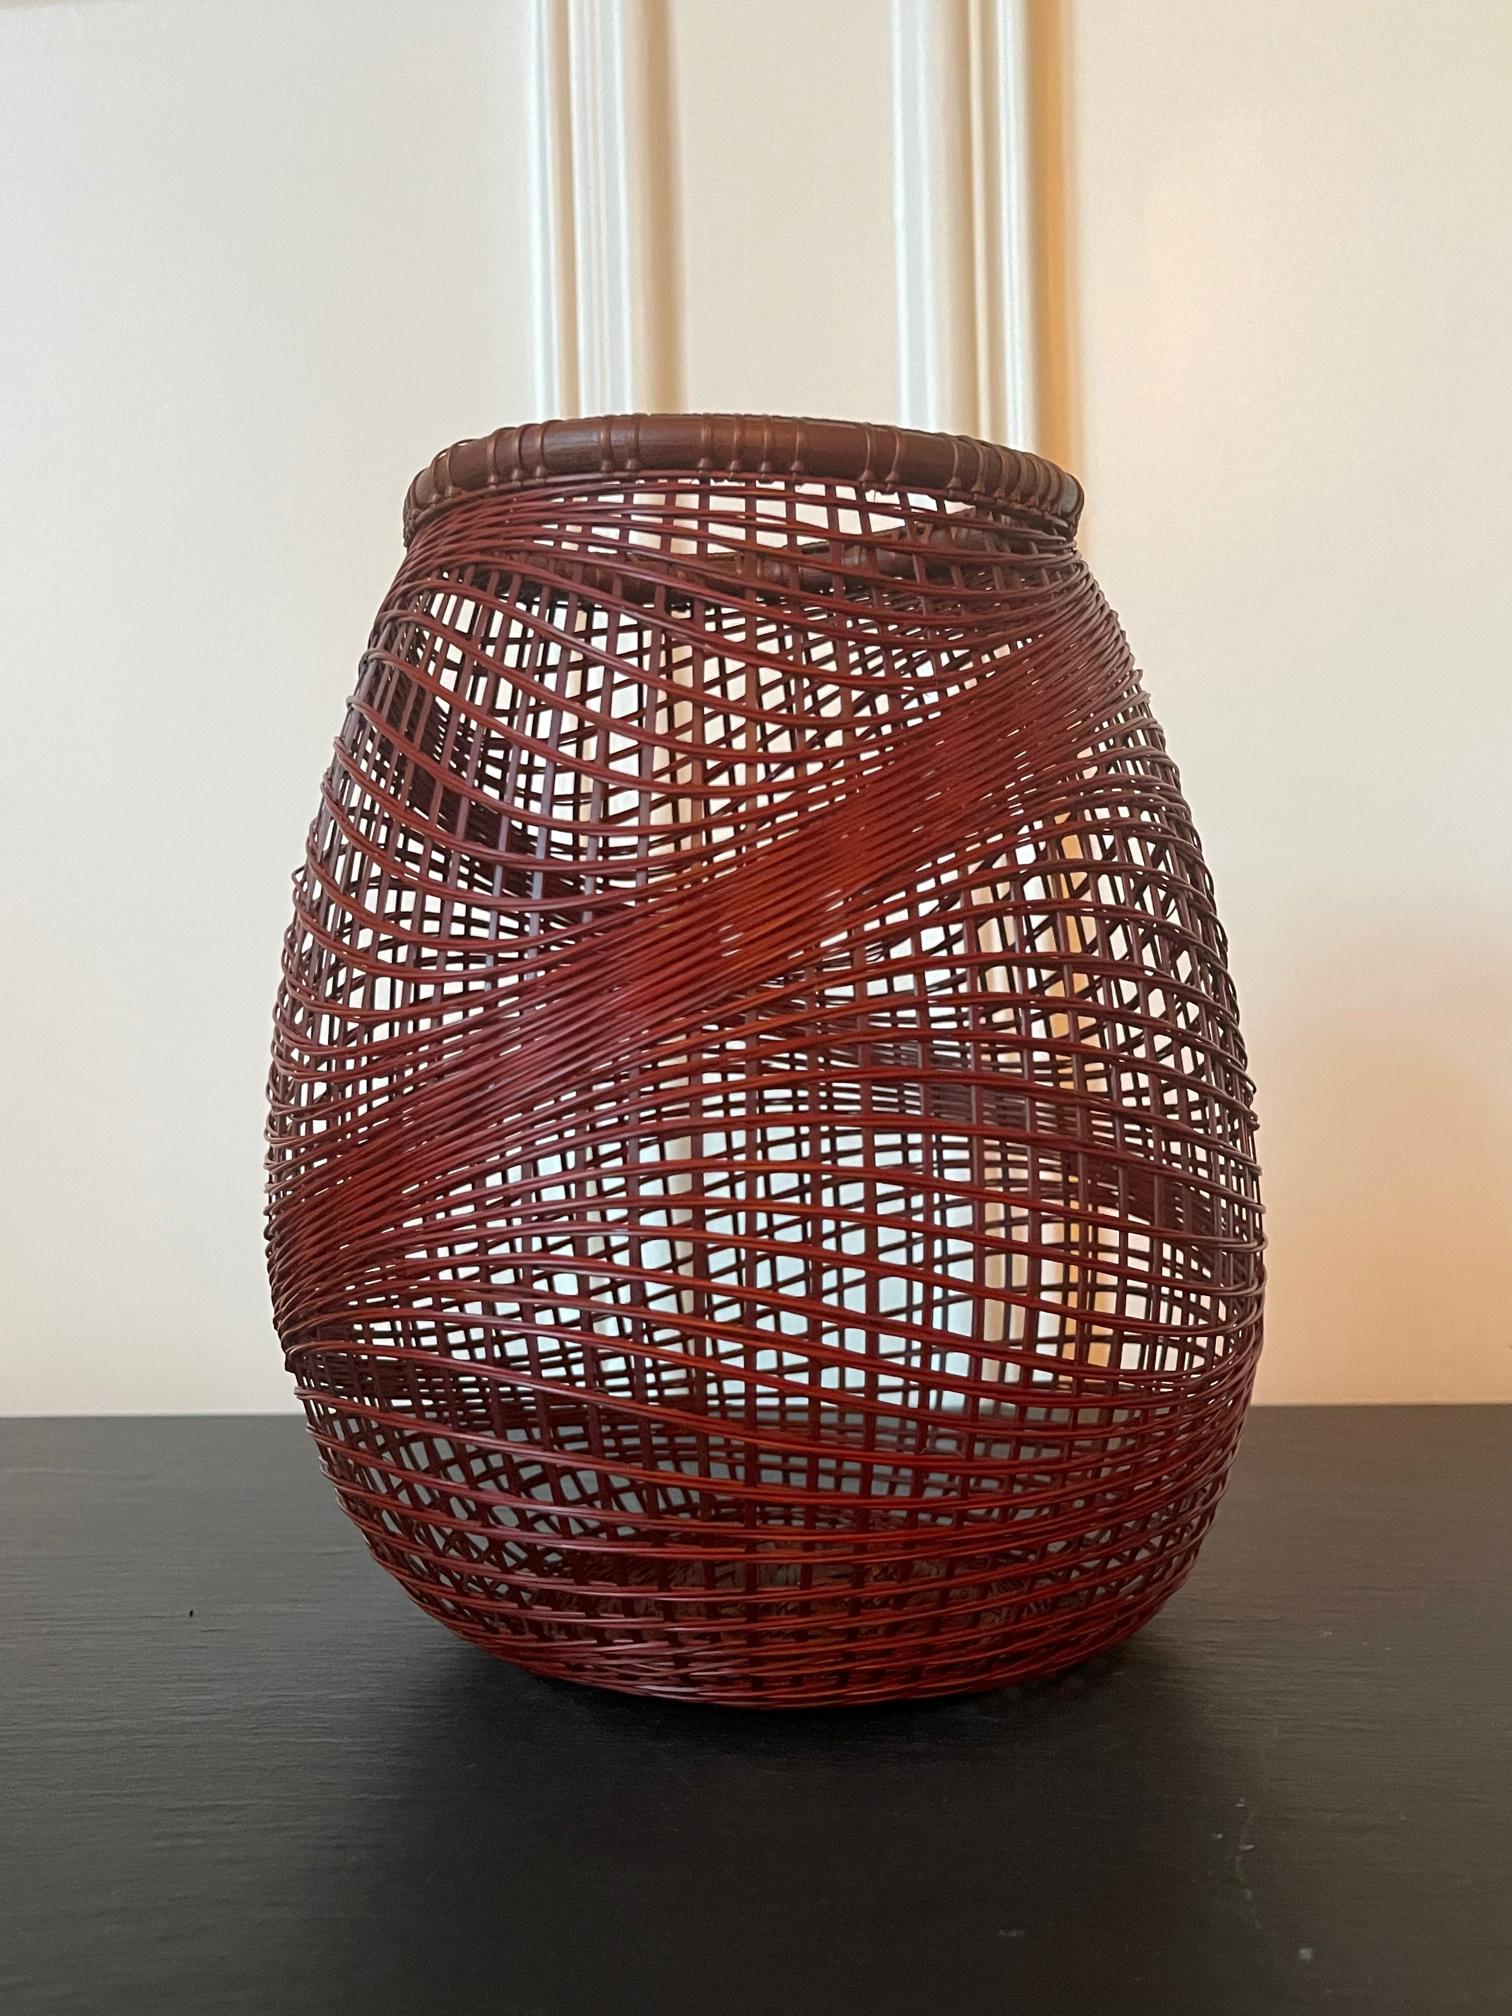 A Japanese Ikebana bamboo basket woven by artist Abe Motoshi (Japanese, b. 1942). Constructed with lacquered reddish Madake bamboo and rattan with technique of open and irregular twinning, the basket features an organic form with undulating woven